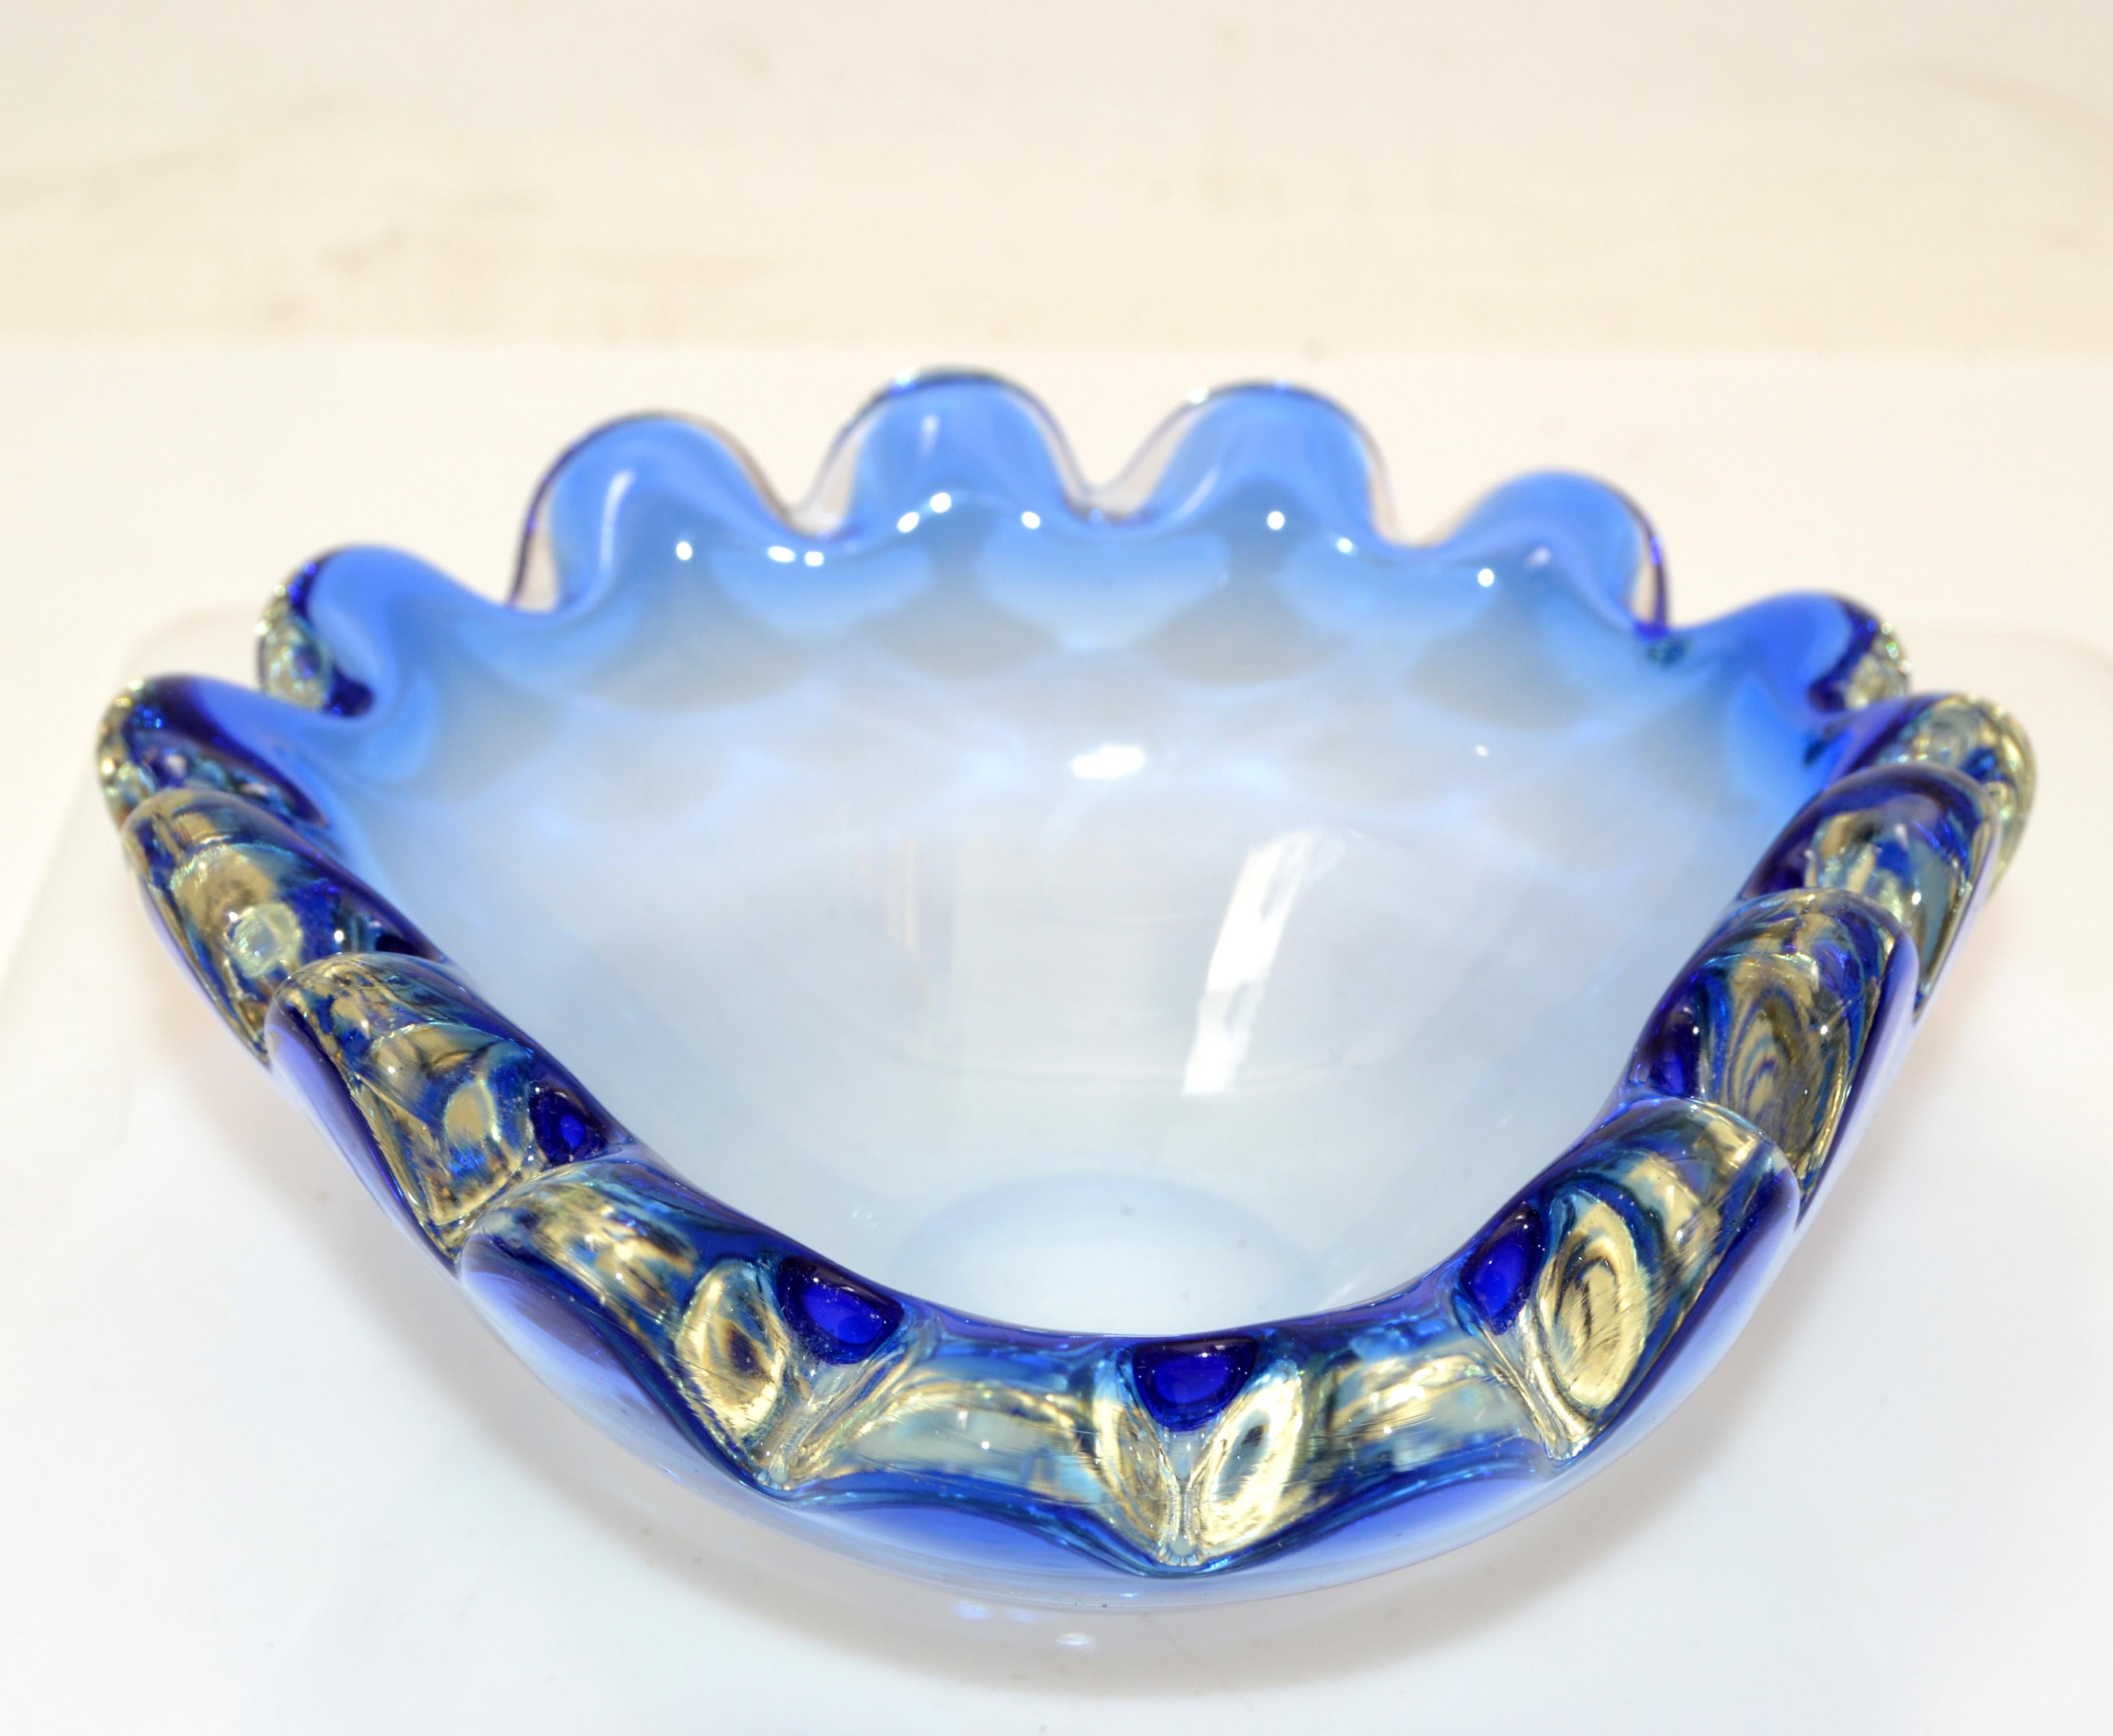 Fratelli Toso blown Murano Art Glass decorative Bowl, Vide-Poche, Candy Dish Mid-Century Modern made in Italy in 1960.